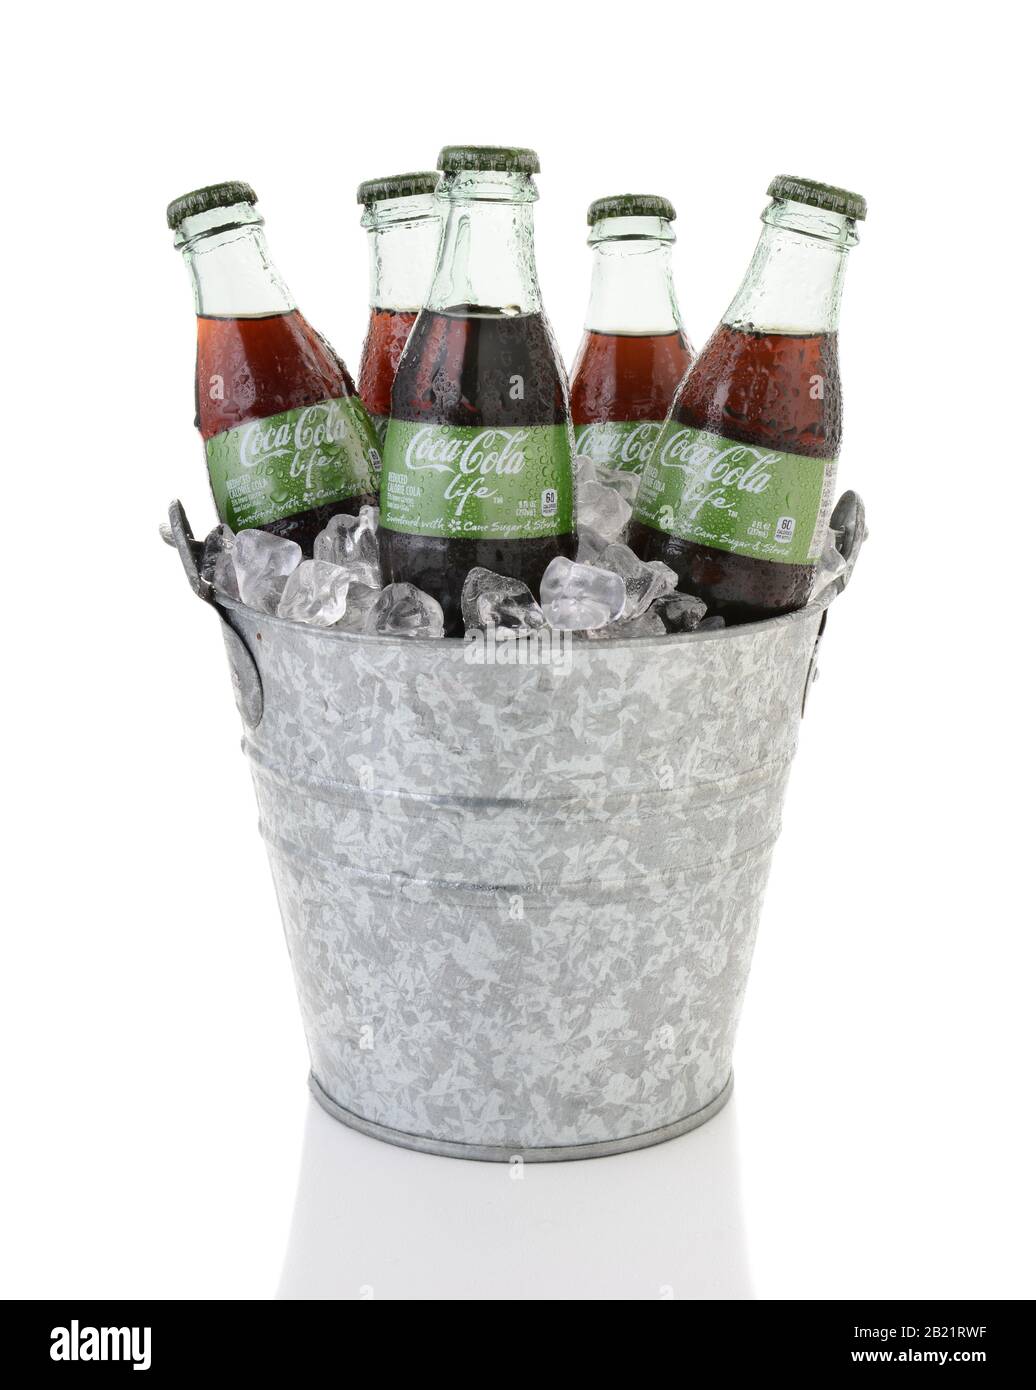 IRVINE, CA - FEBRUARY 15, 2015: Coca-Cola Life bottles in an ice bucket. A reduced calorie soft drink sweetened with cane sugar and Stevia, containing Stock Photo